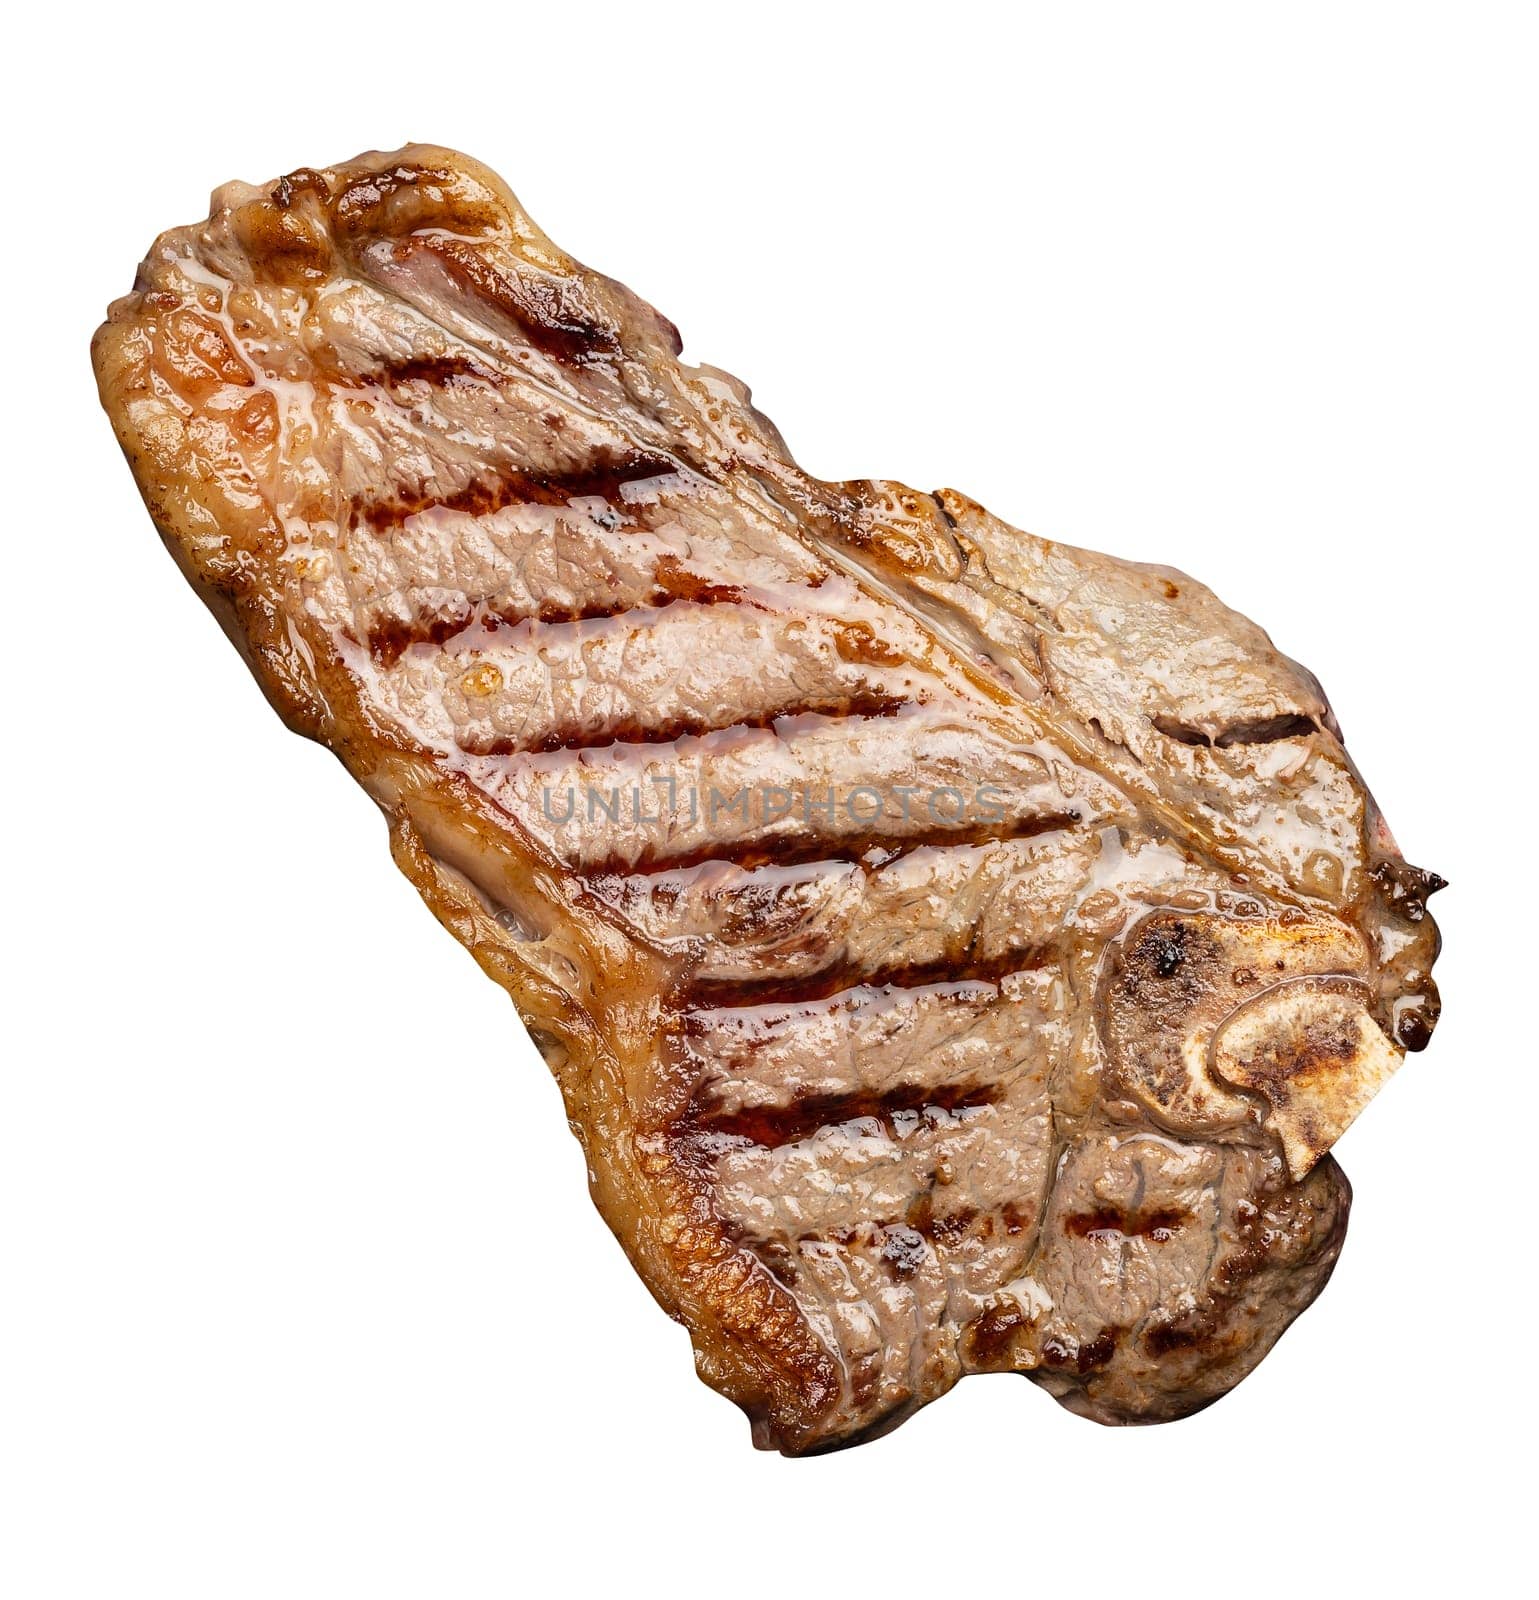 Whole fried New York beef steak on a white background, striploin doneness rare, top view